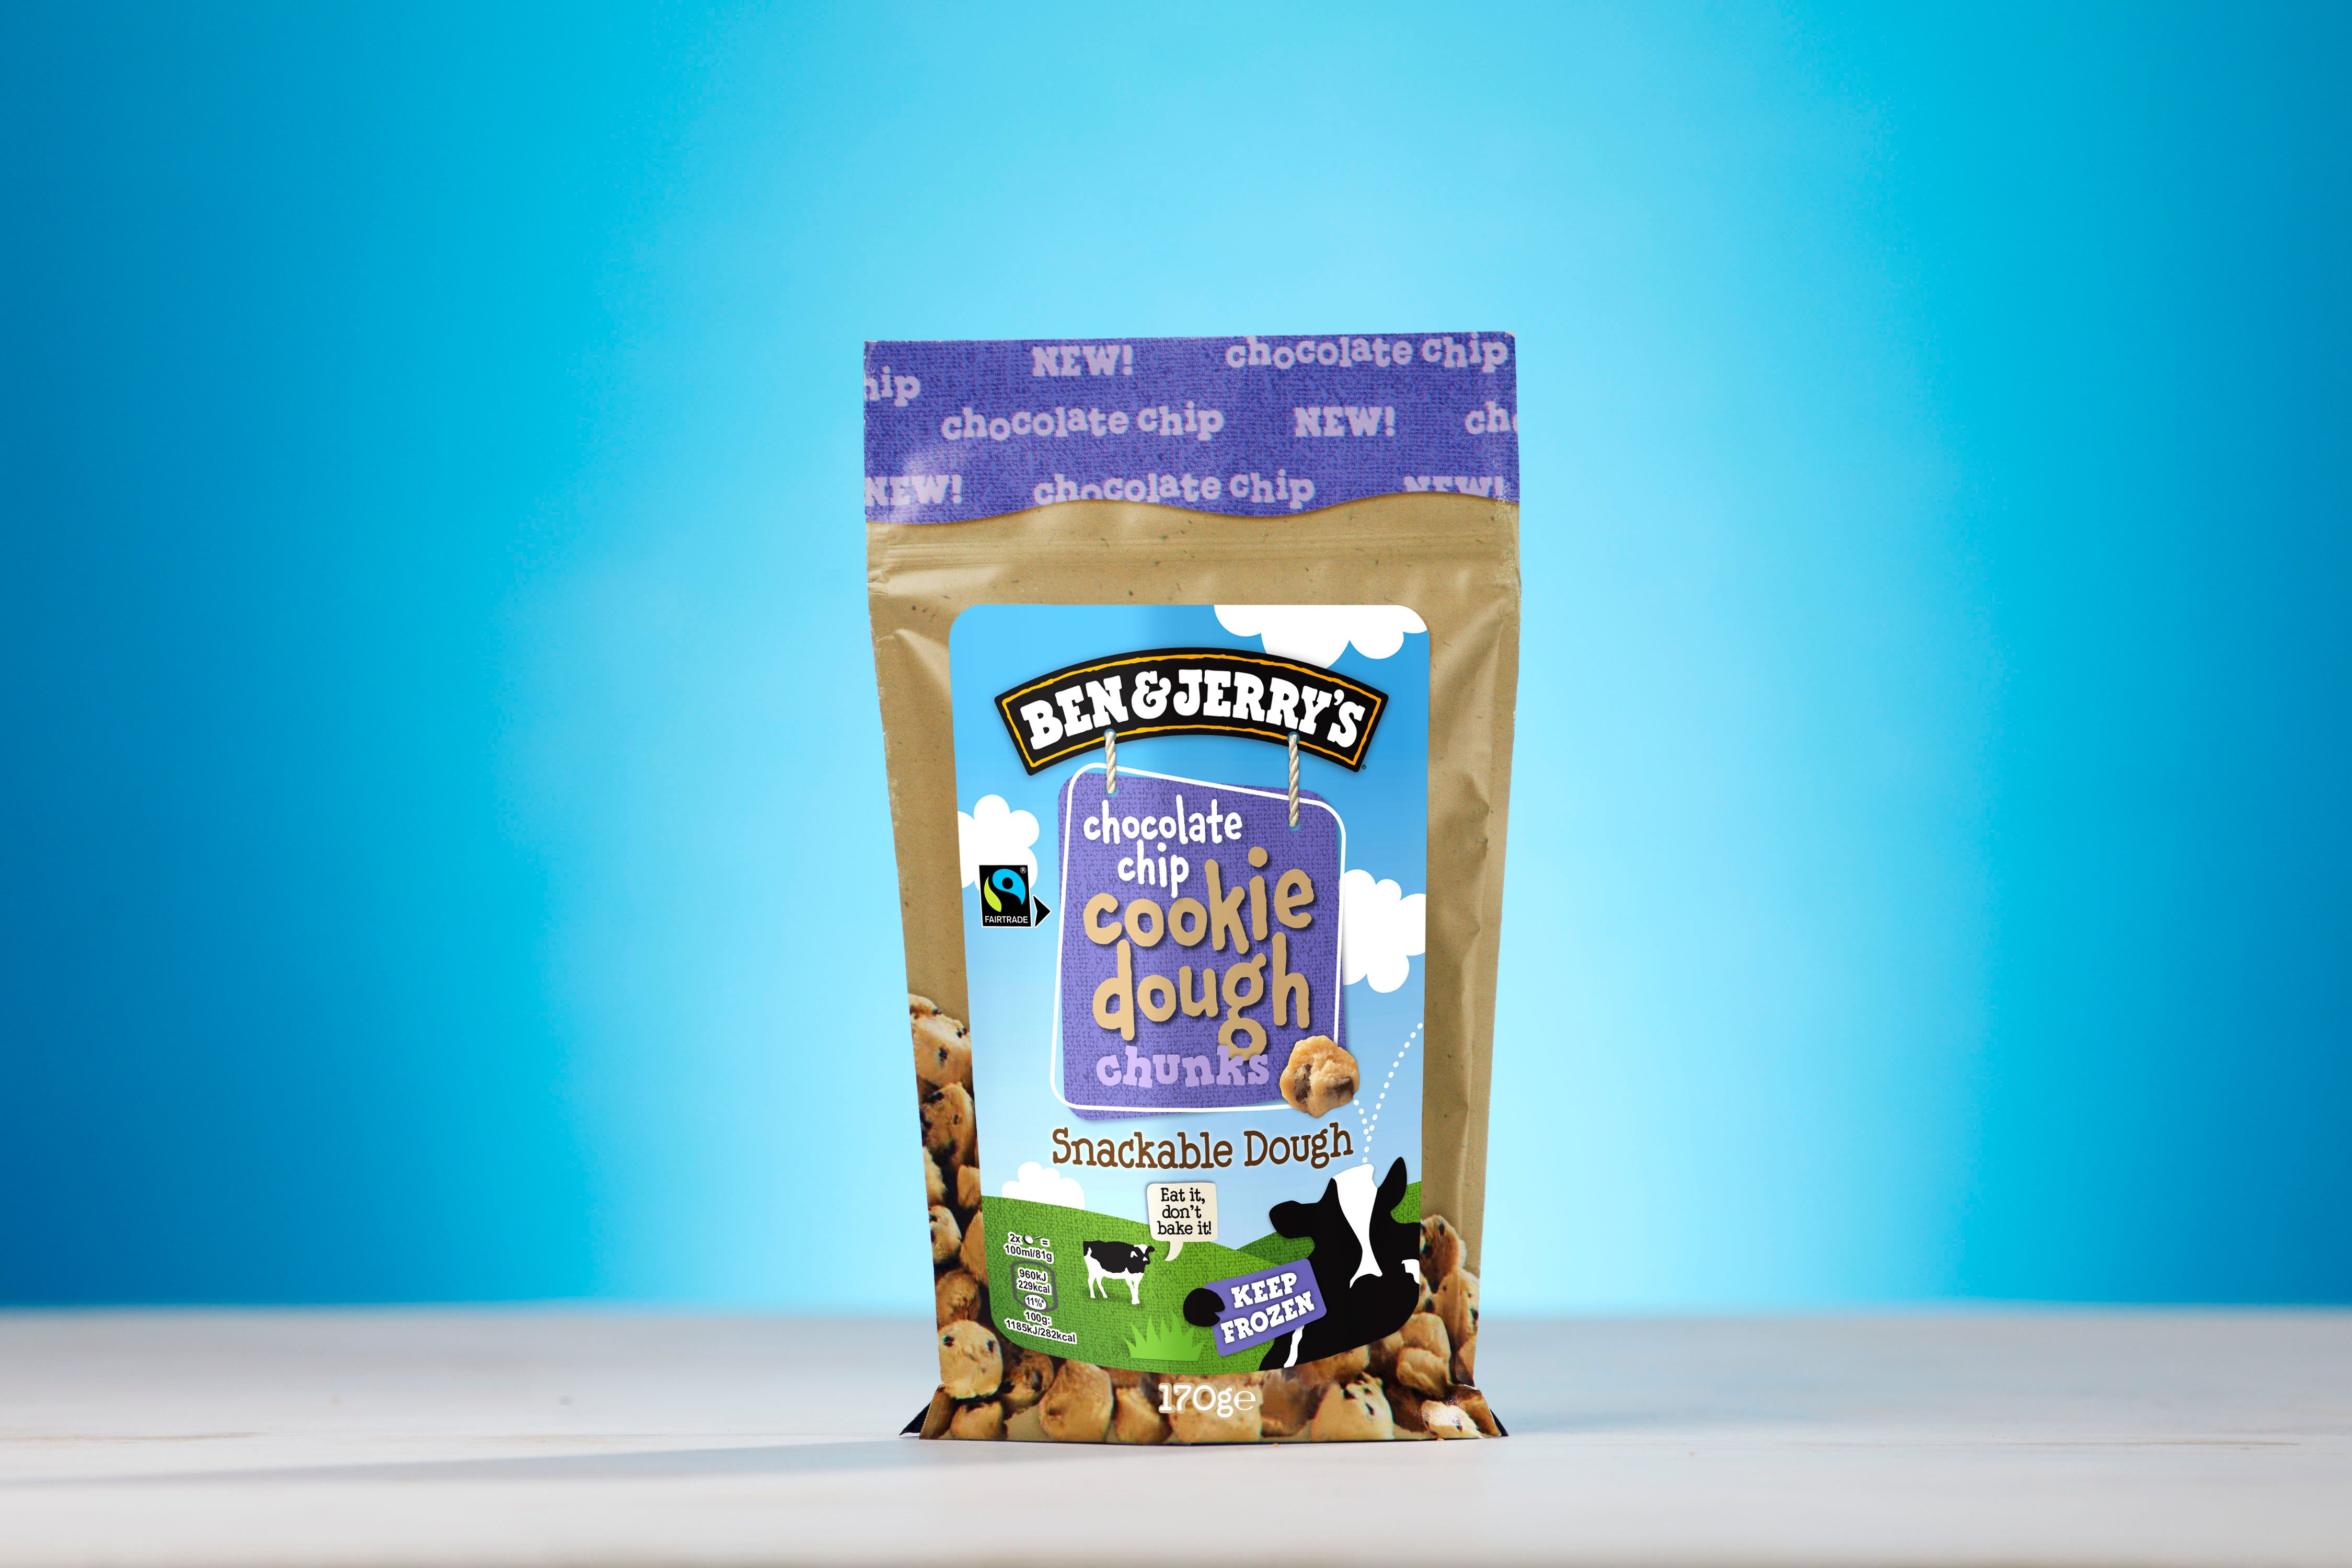 Ben & Jerry's launches Cookie Dough Chunks